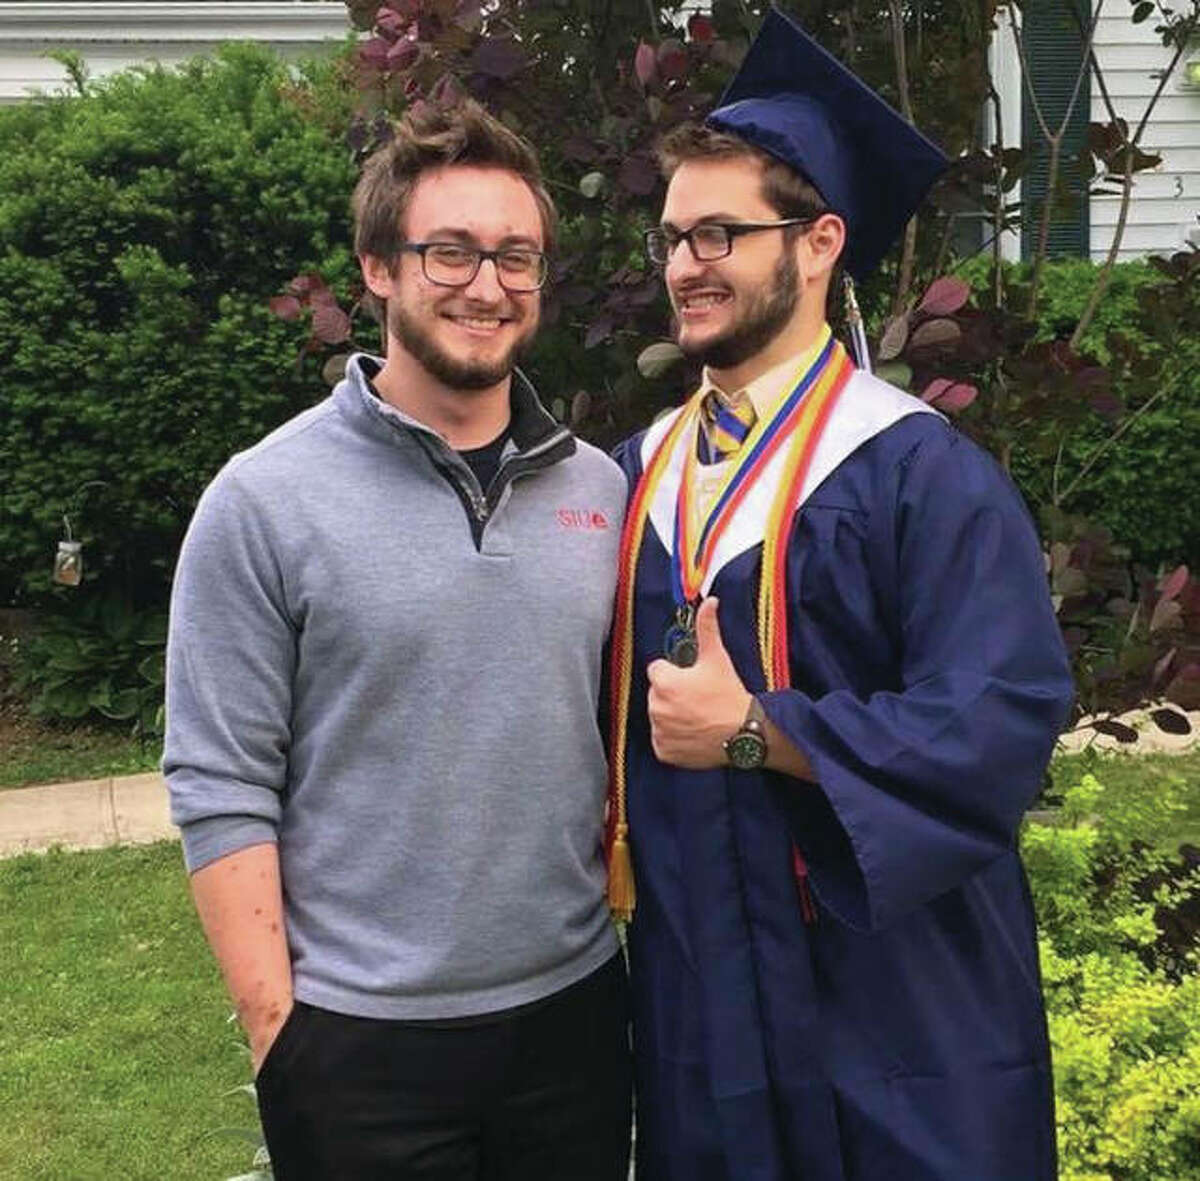 Spencer Bacus, left, with his brother, Oliver Bacus, on Oliver’s graduation day.